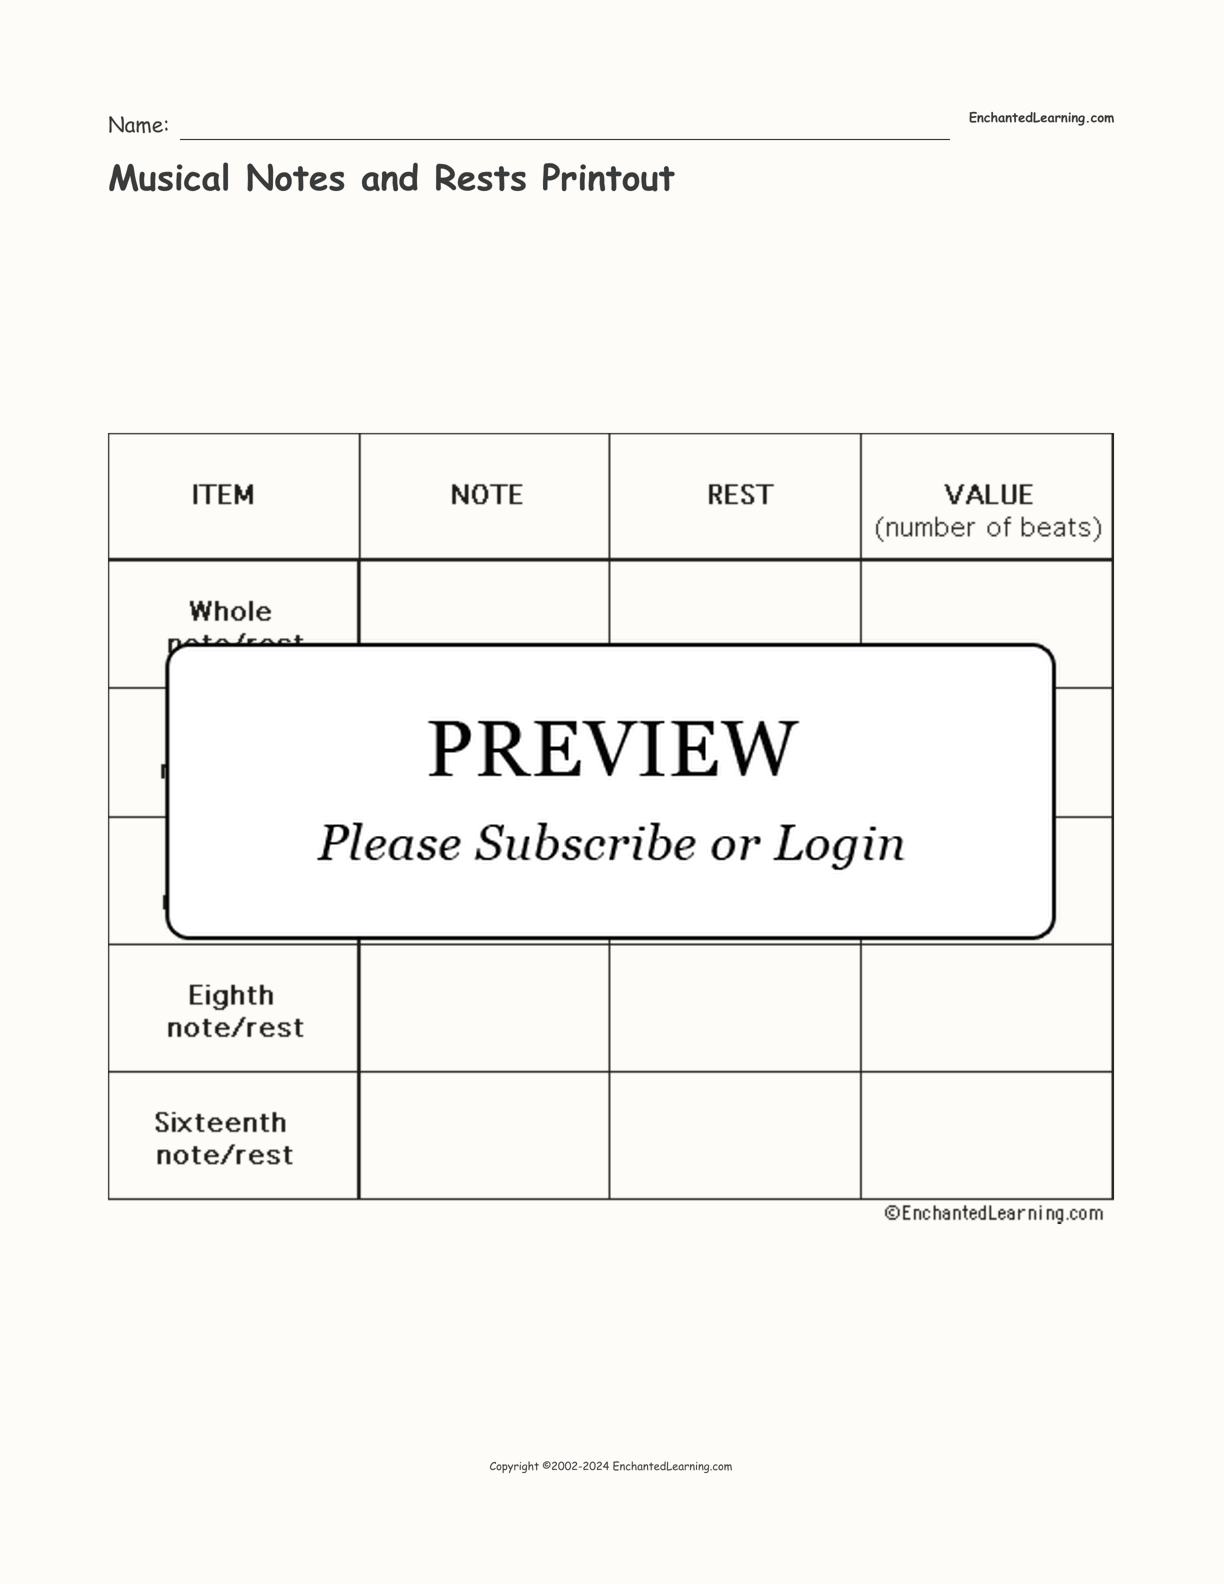 Musical Notes and Rests Printout interactive worksheet page 1